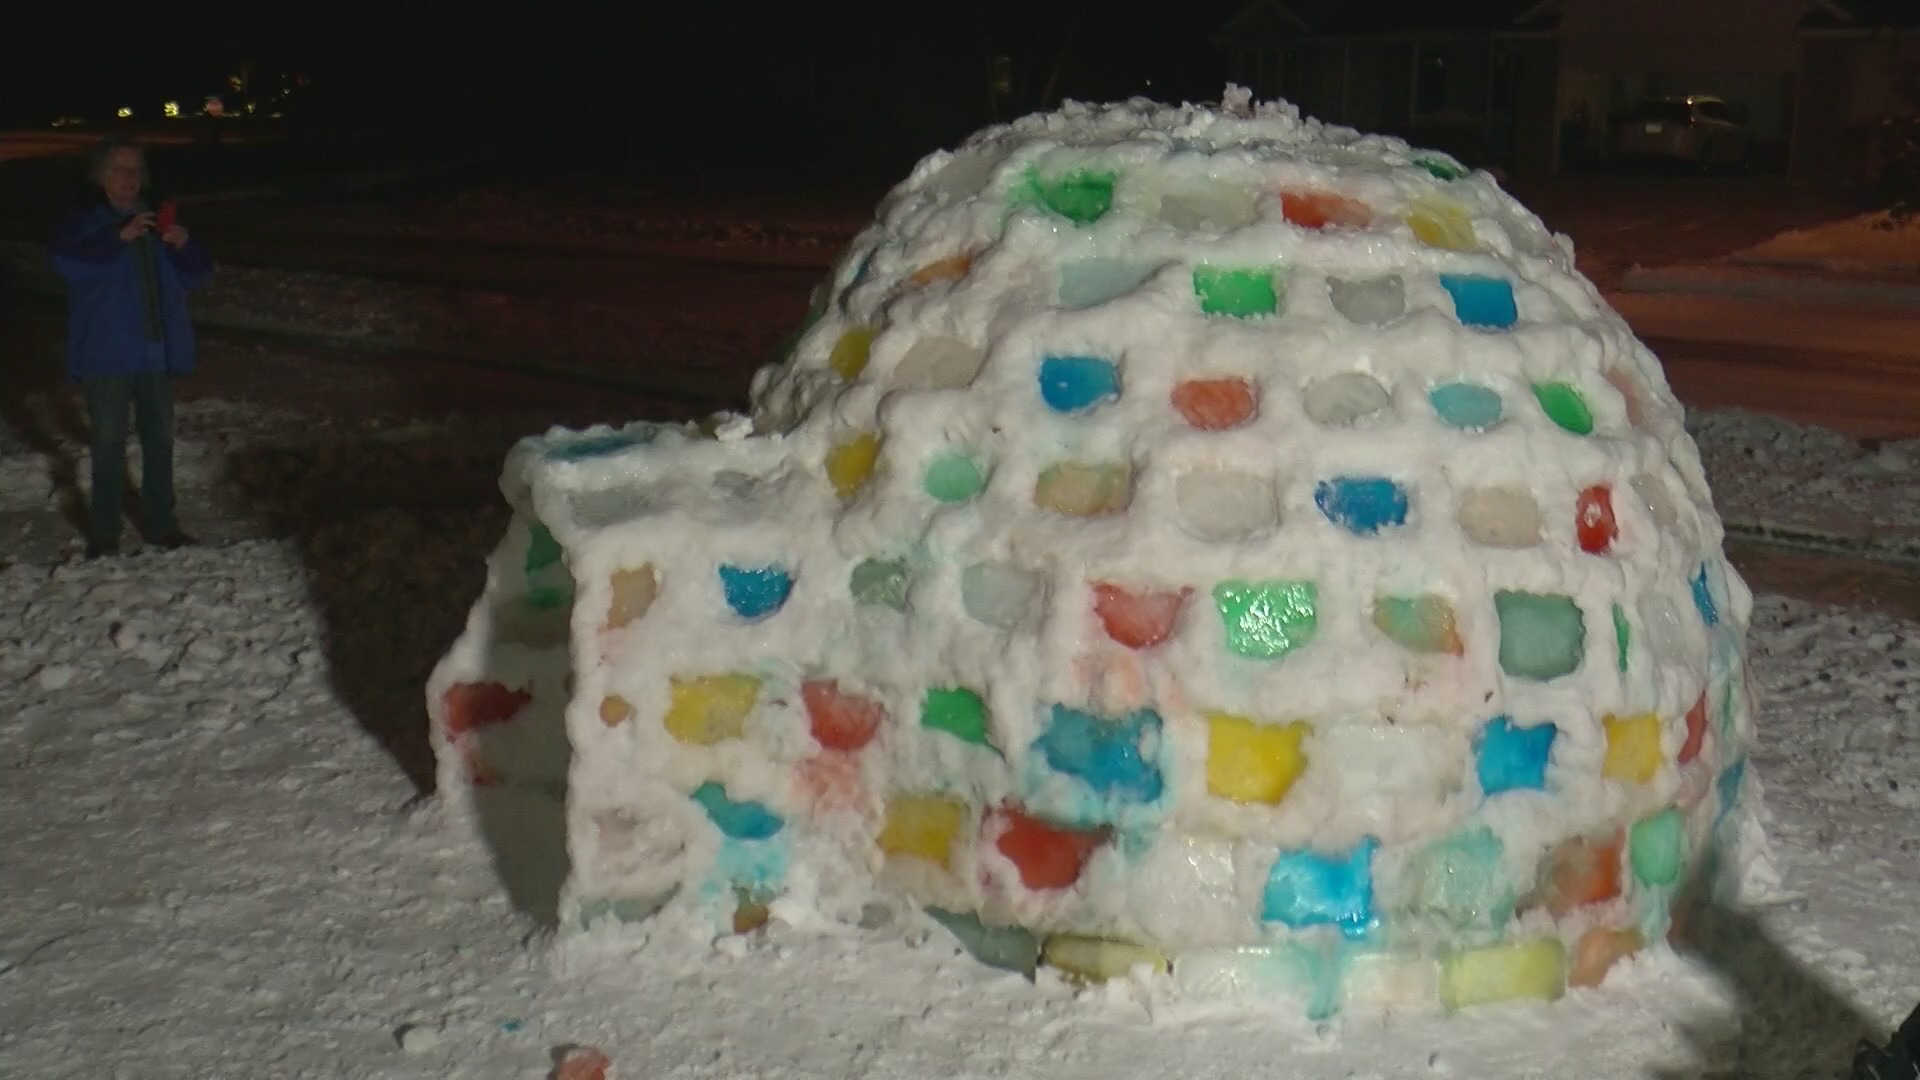 Owatonna Igloo: Family Builds Giant, Colorful Shelter In Front Yard – WCCO